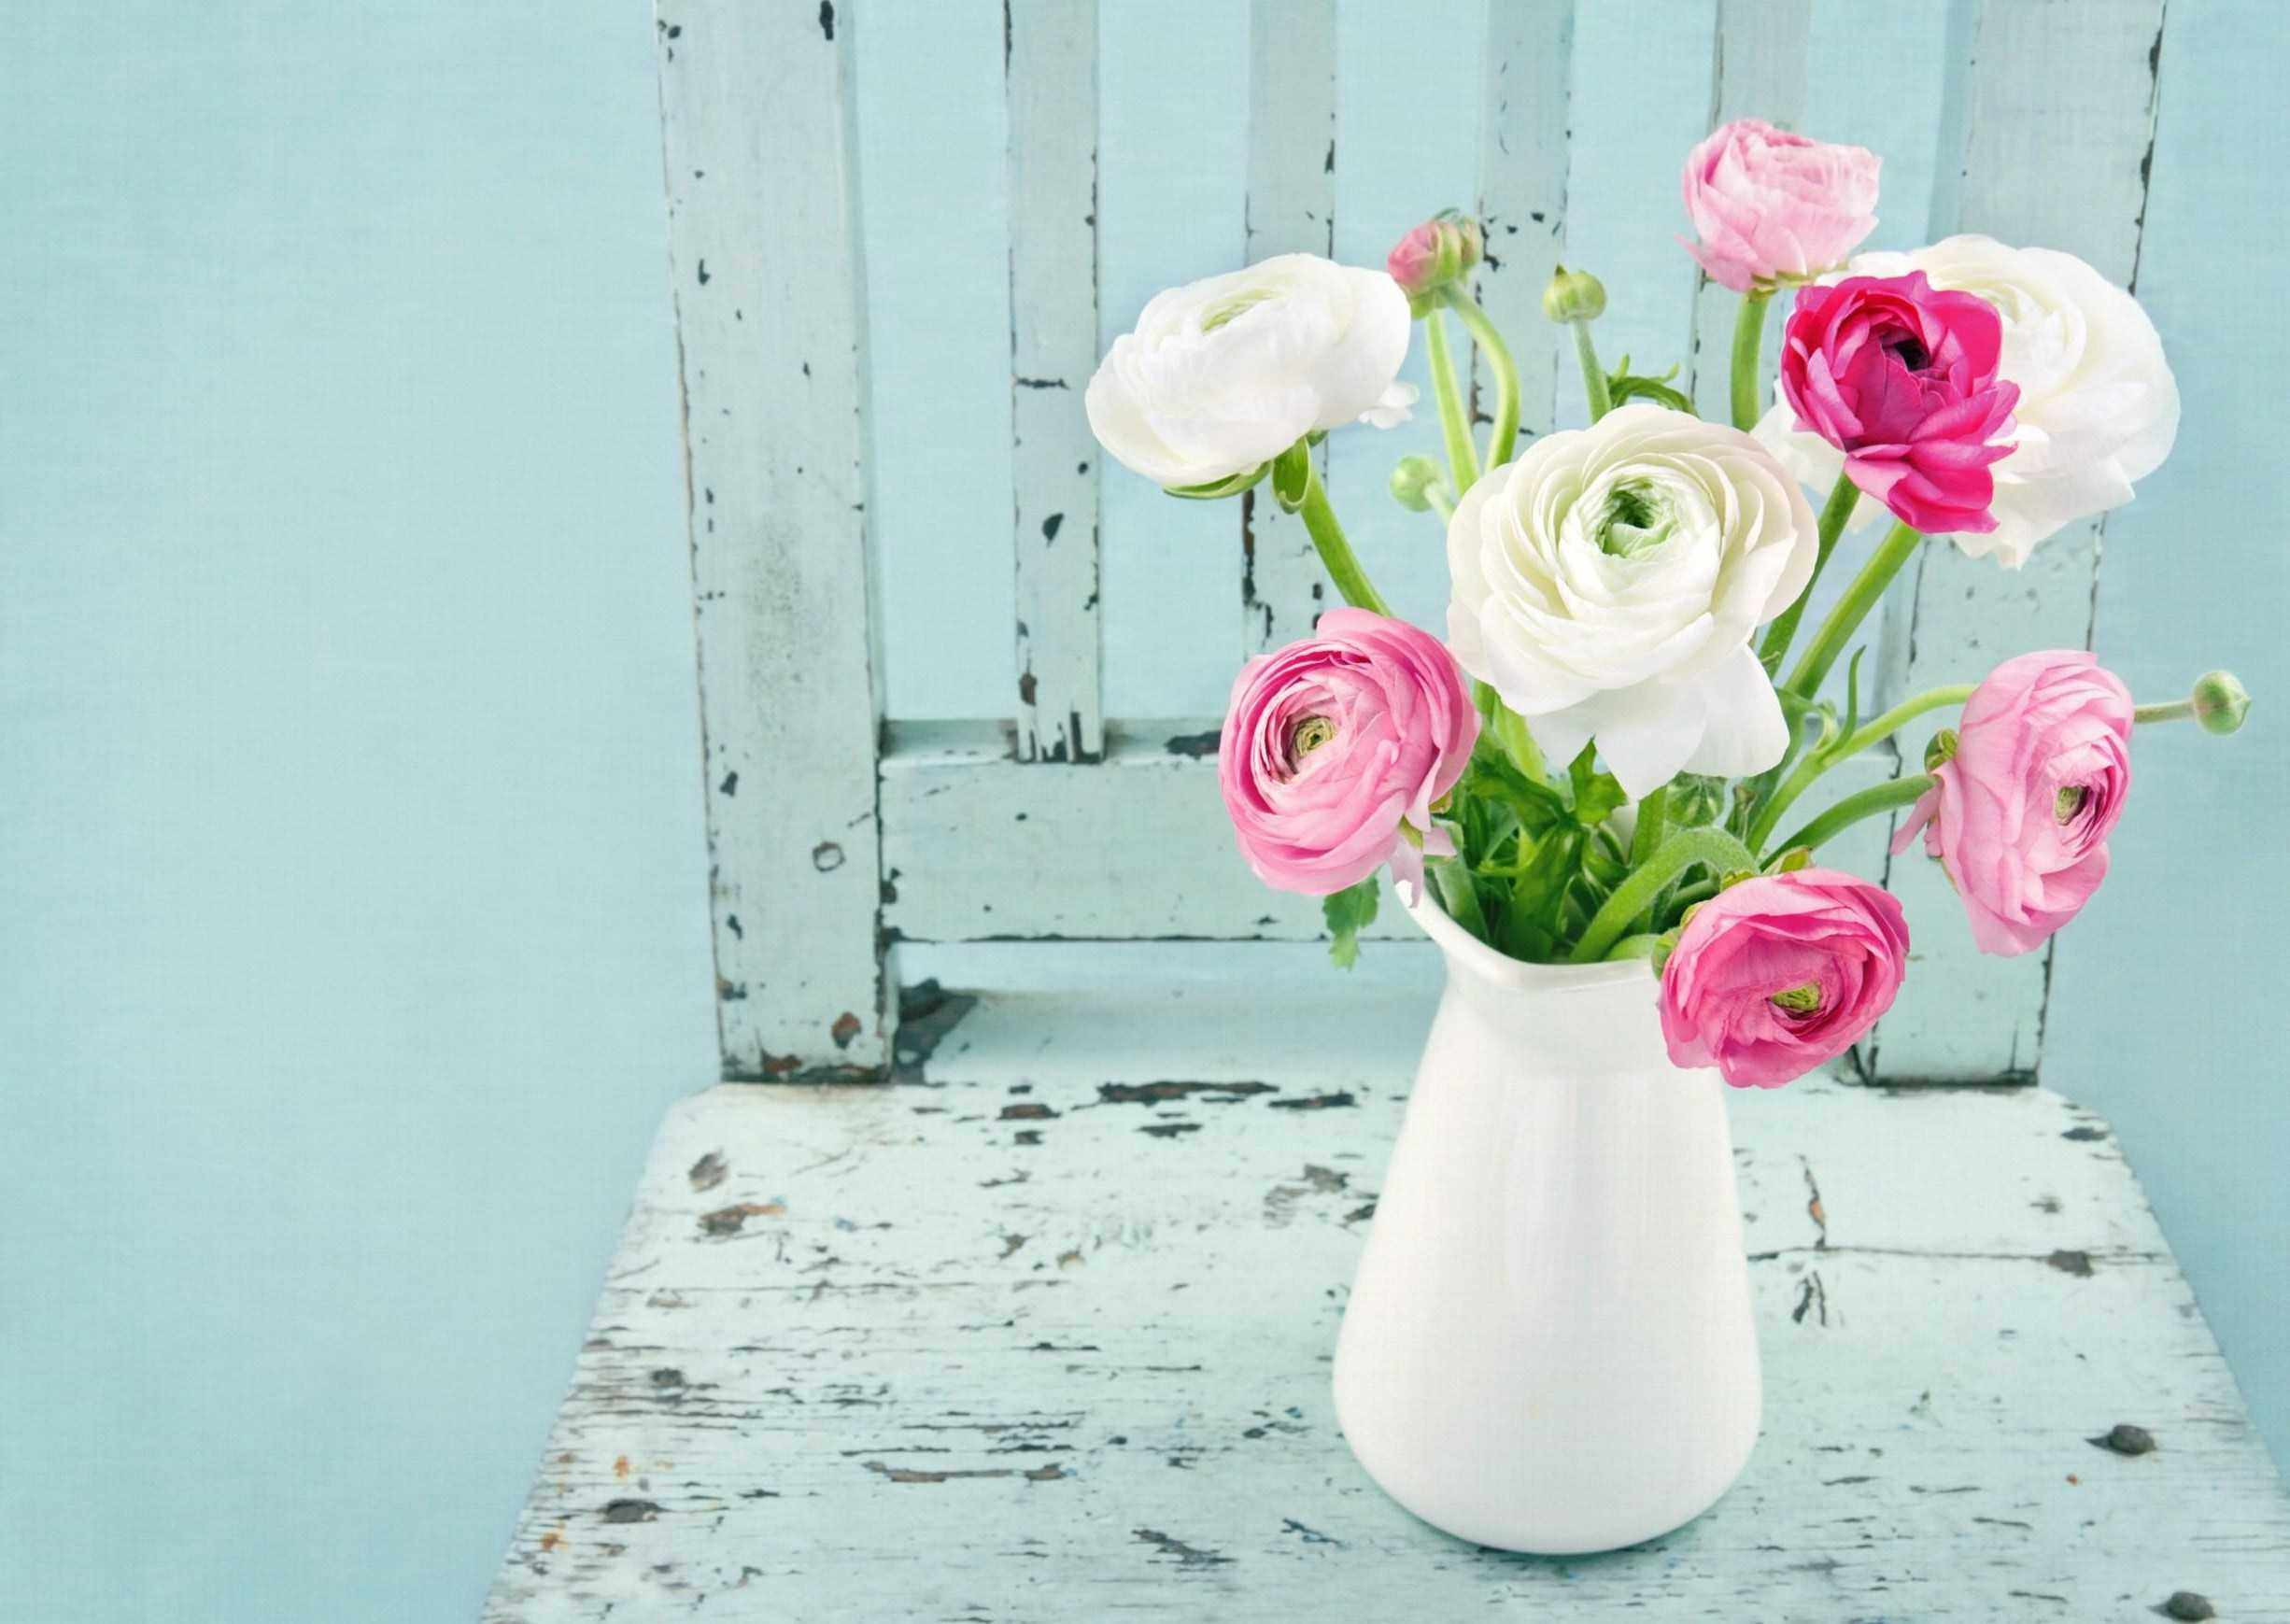 cheap clear vases of flowers new orleans fresh living room roses in a vase new clear vase inside flowers new orleans fresh living room roses in a vase new clear vase 0d tags amazing elegant